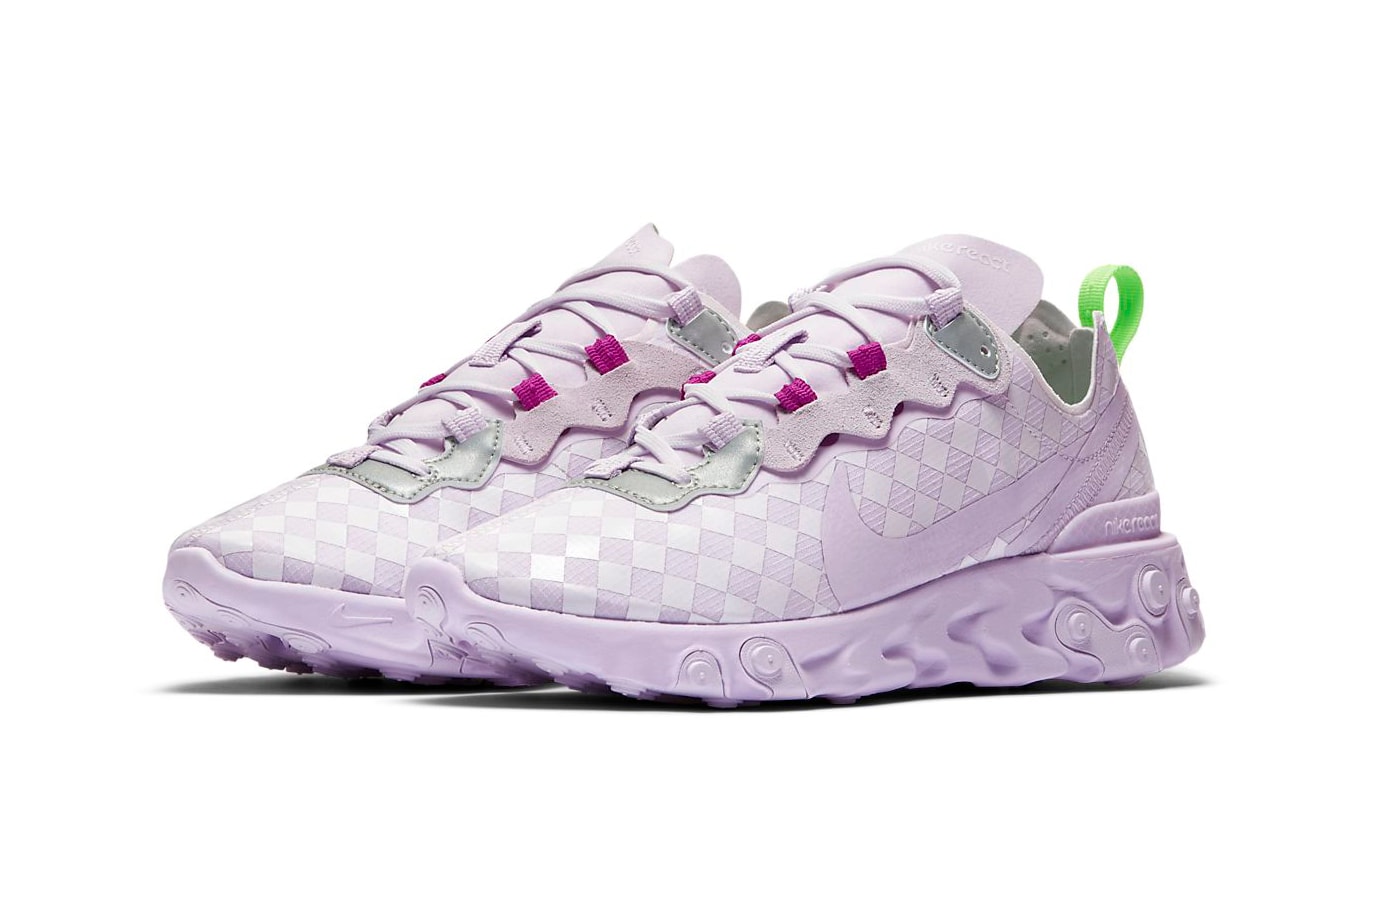 Nike React Element 55 Barely Grape Lilac Pastel Lavender Purple Sneakers Trainers